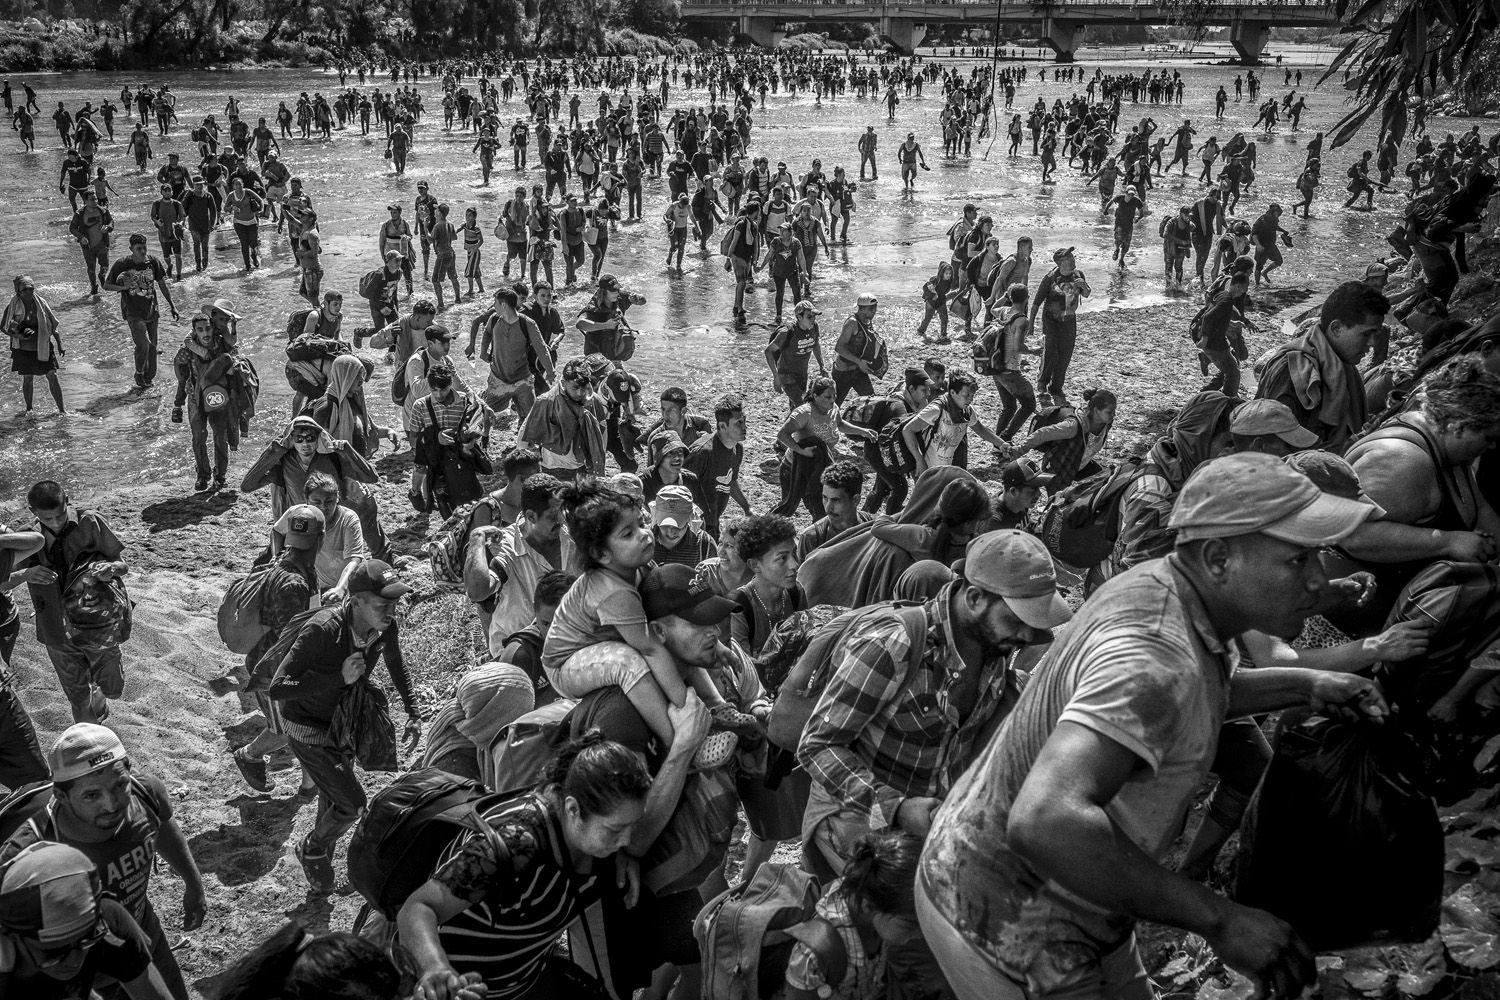 A crowded scene in black and white, depicting numerous people wading through a shallow river. The chaos and urgency of movement are palpable as individuals carry belongings and help one another navigate the waters, illustrating the intensity and scale of human migration.